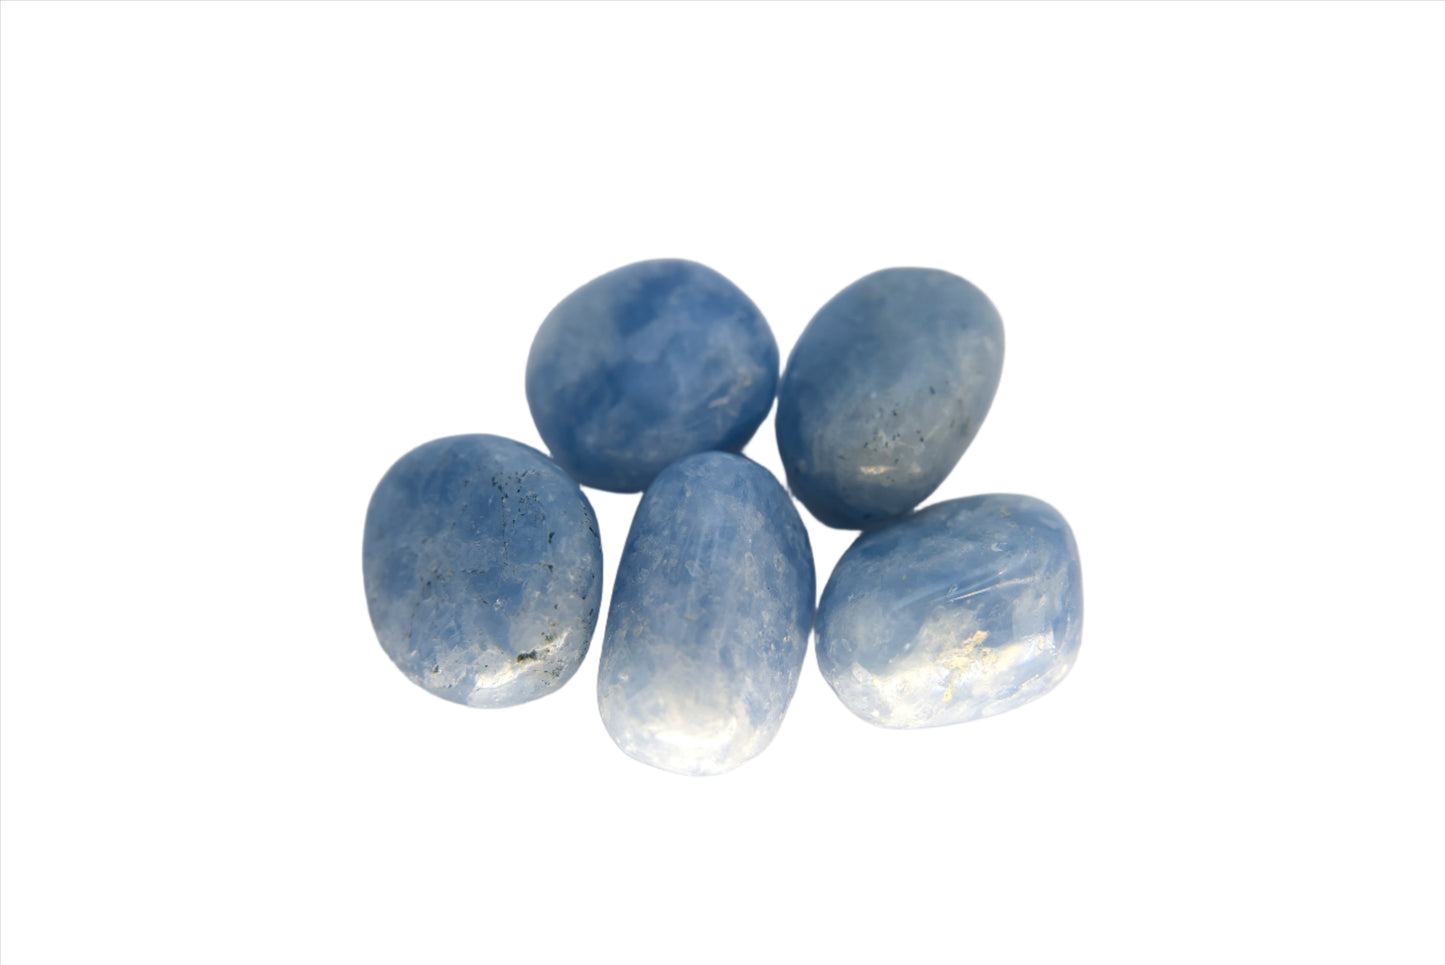 Natural, Hand-Selected Blue Calcite Tumbled Stone Individual Pieces